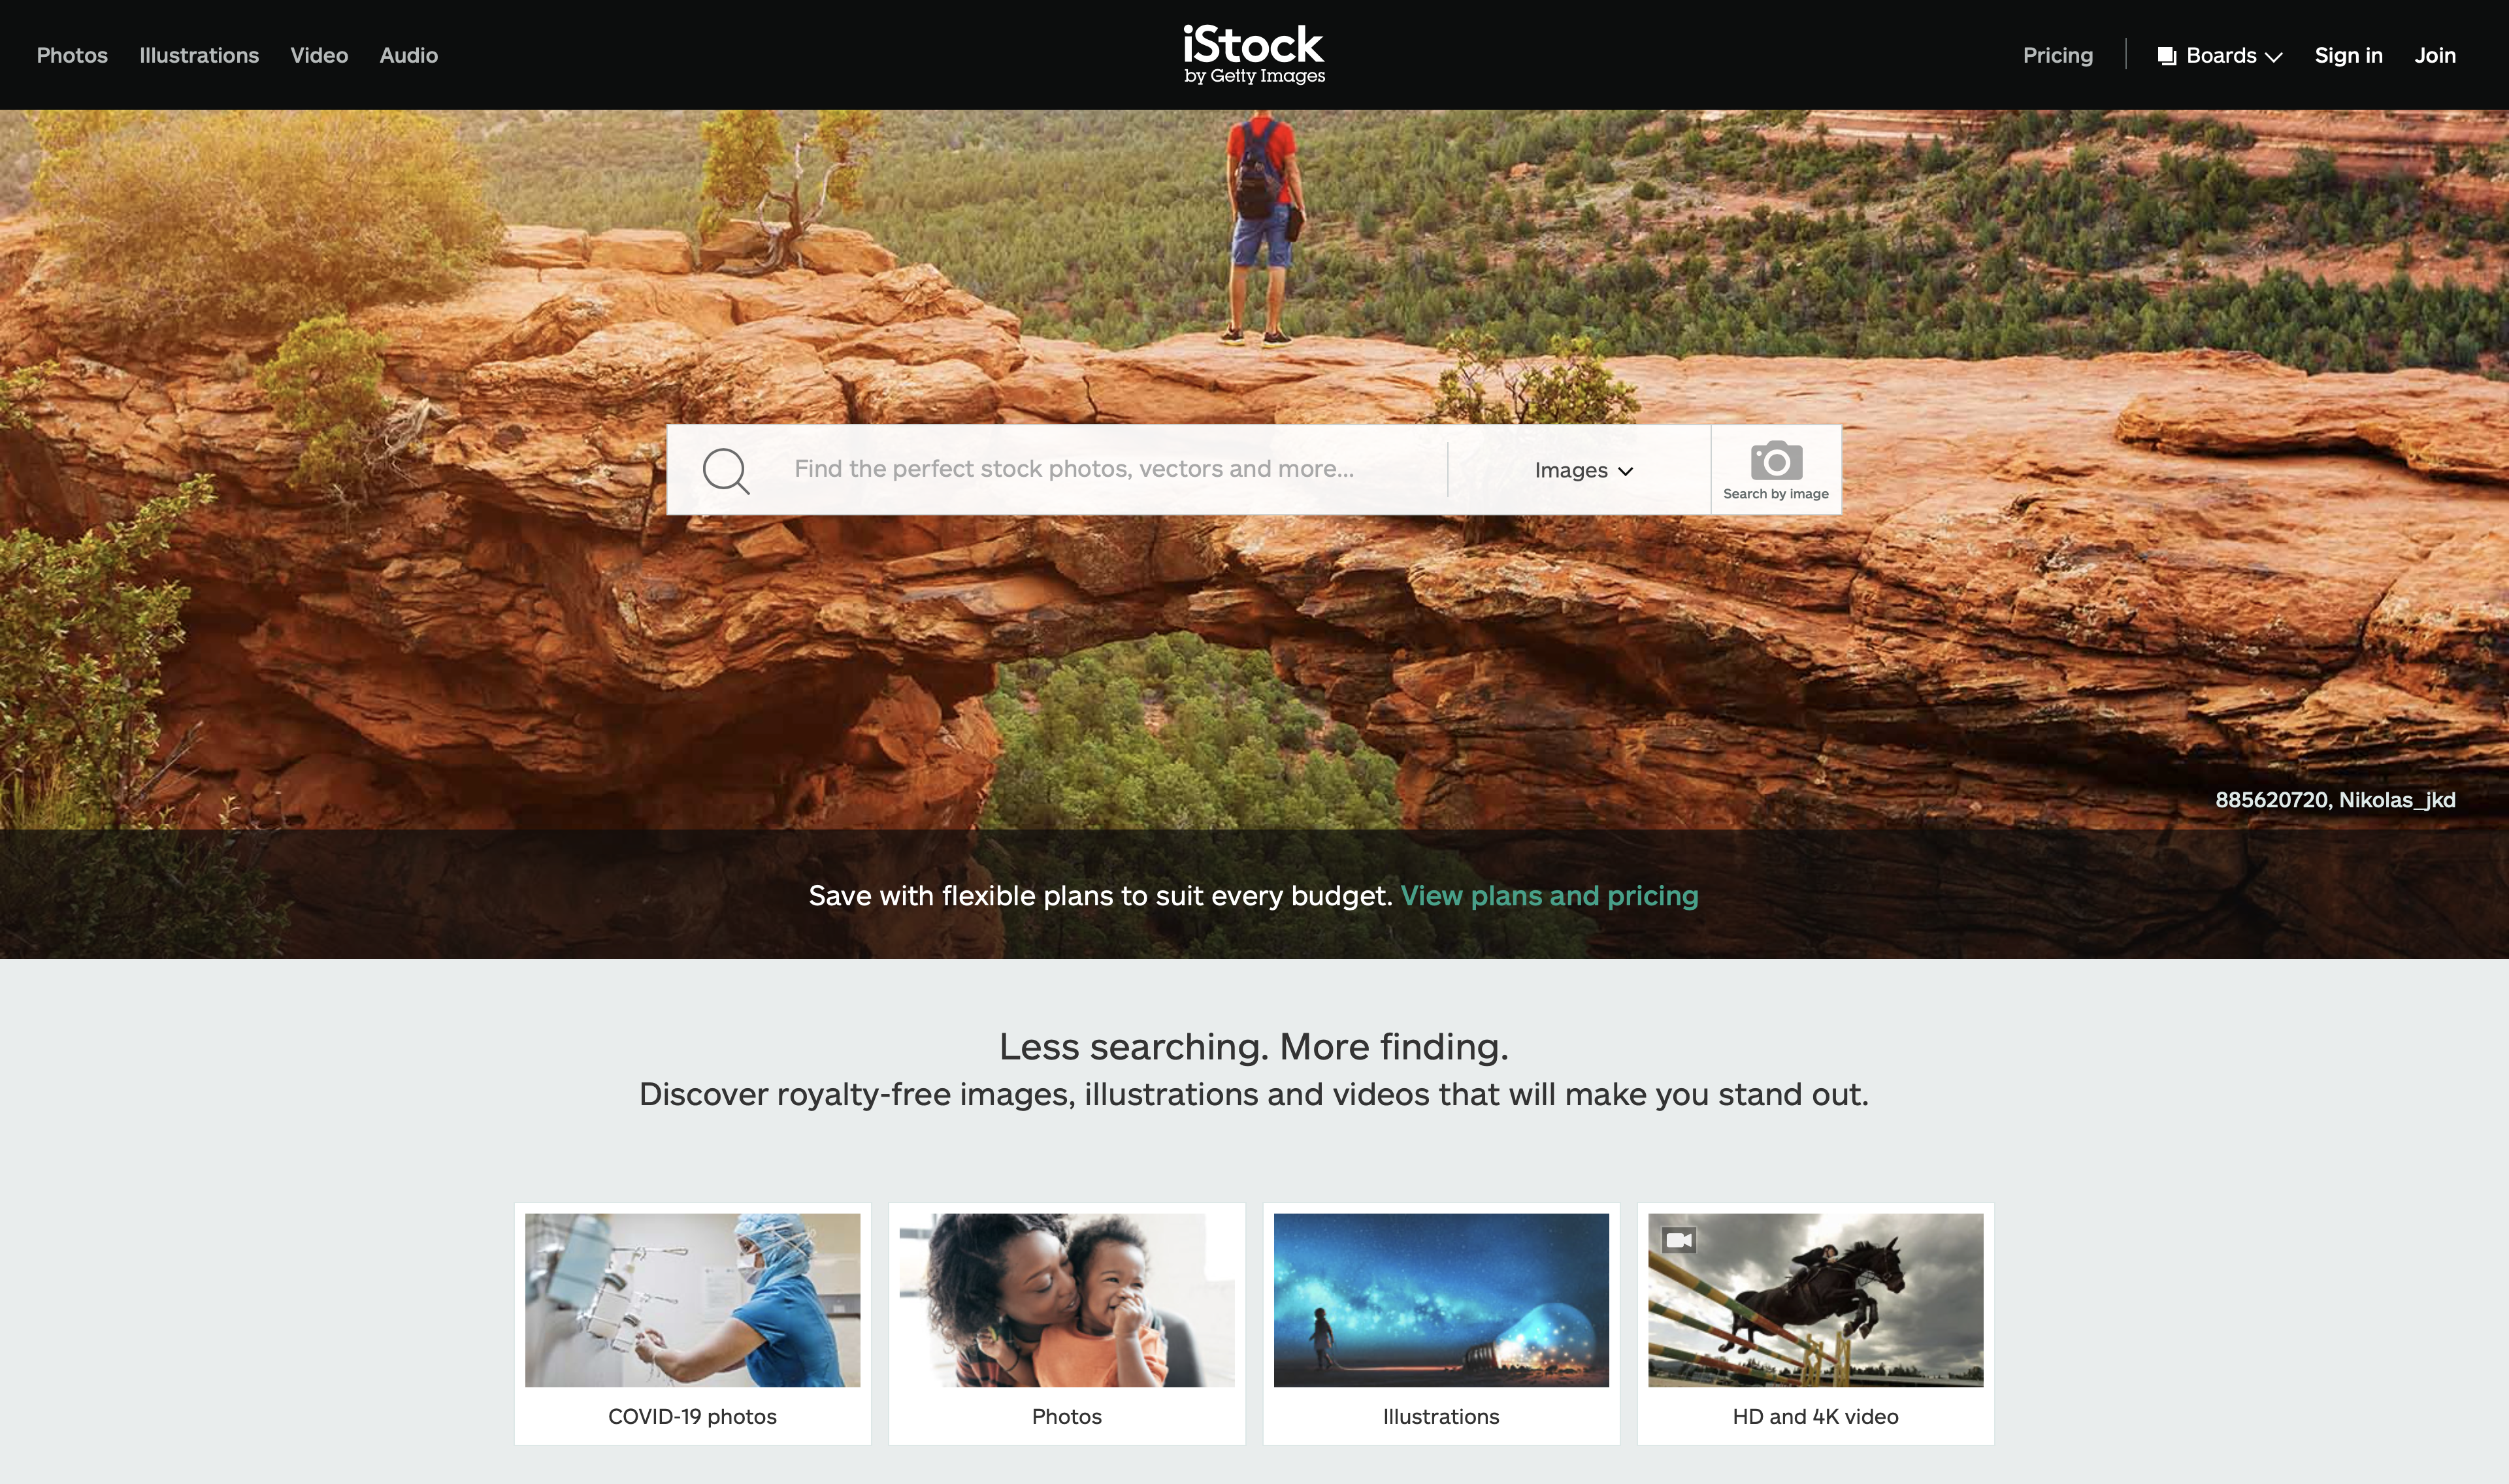 iStock Photo is a good alternative for selling photos